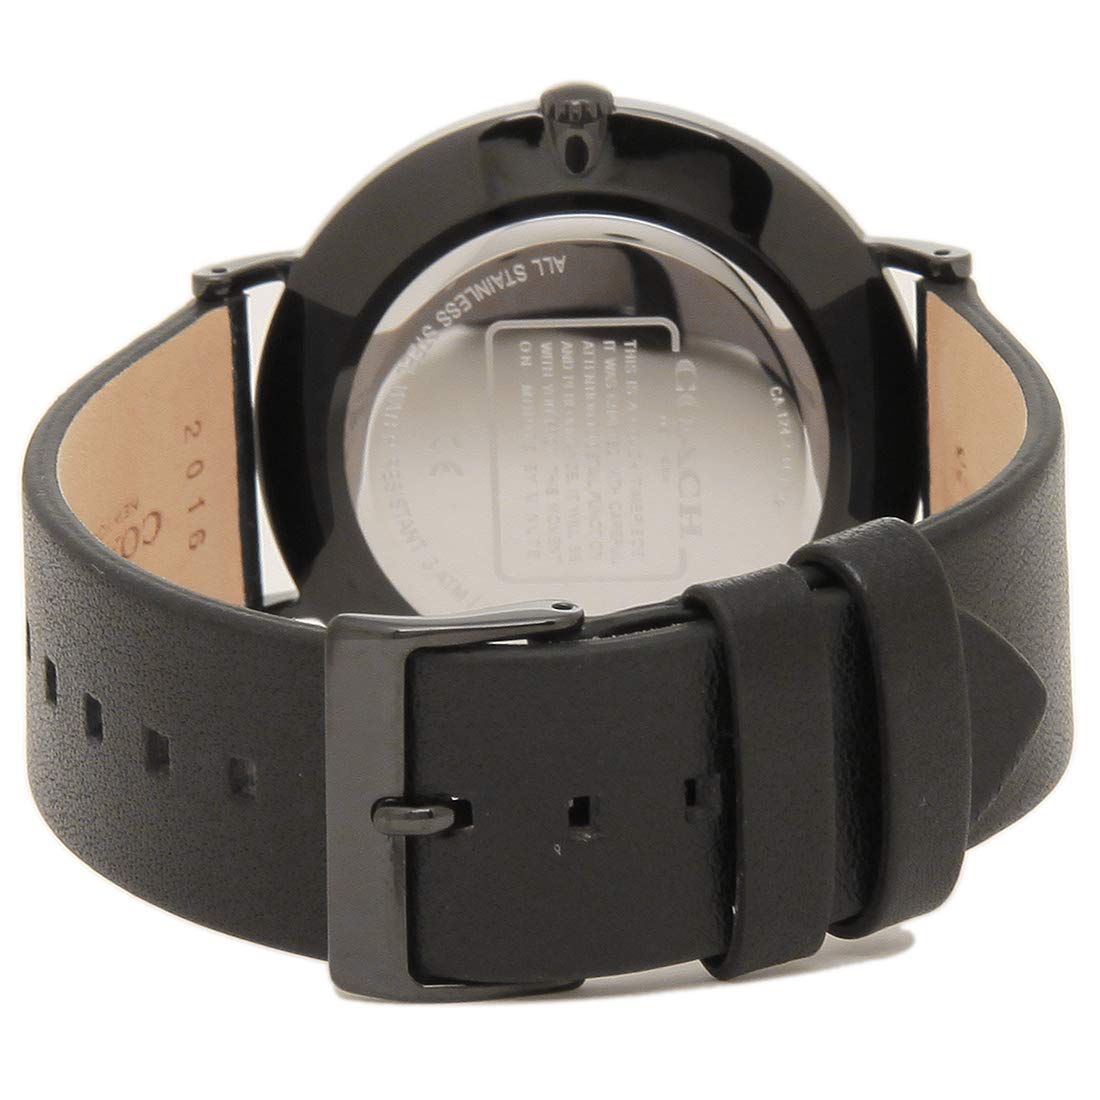 Coach Charles Black Dial Black Leather Strap Watch for Men - 14602434